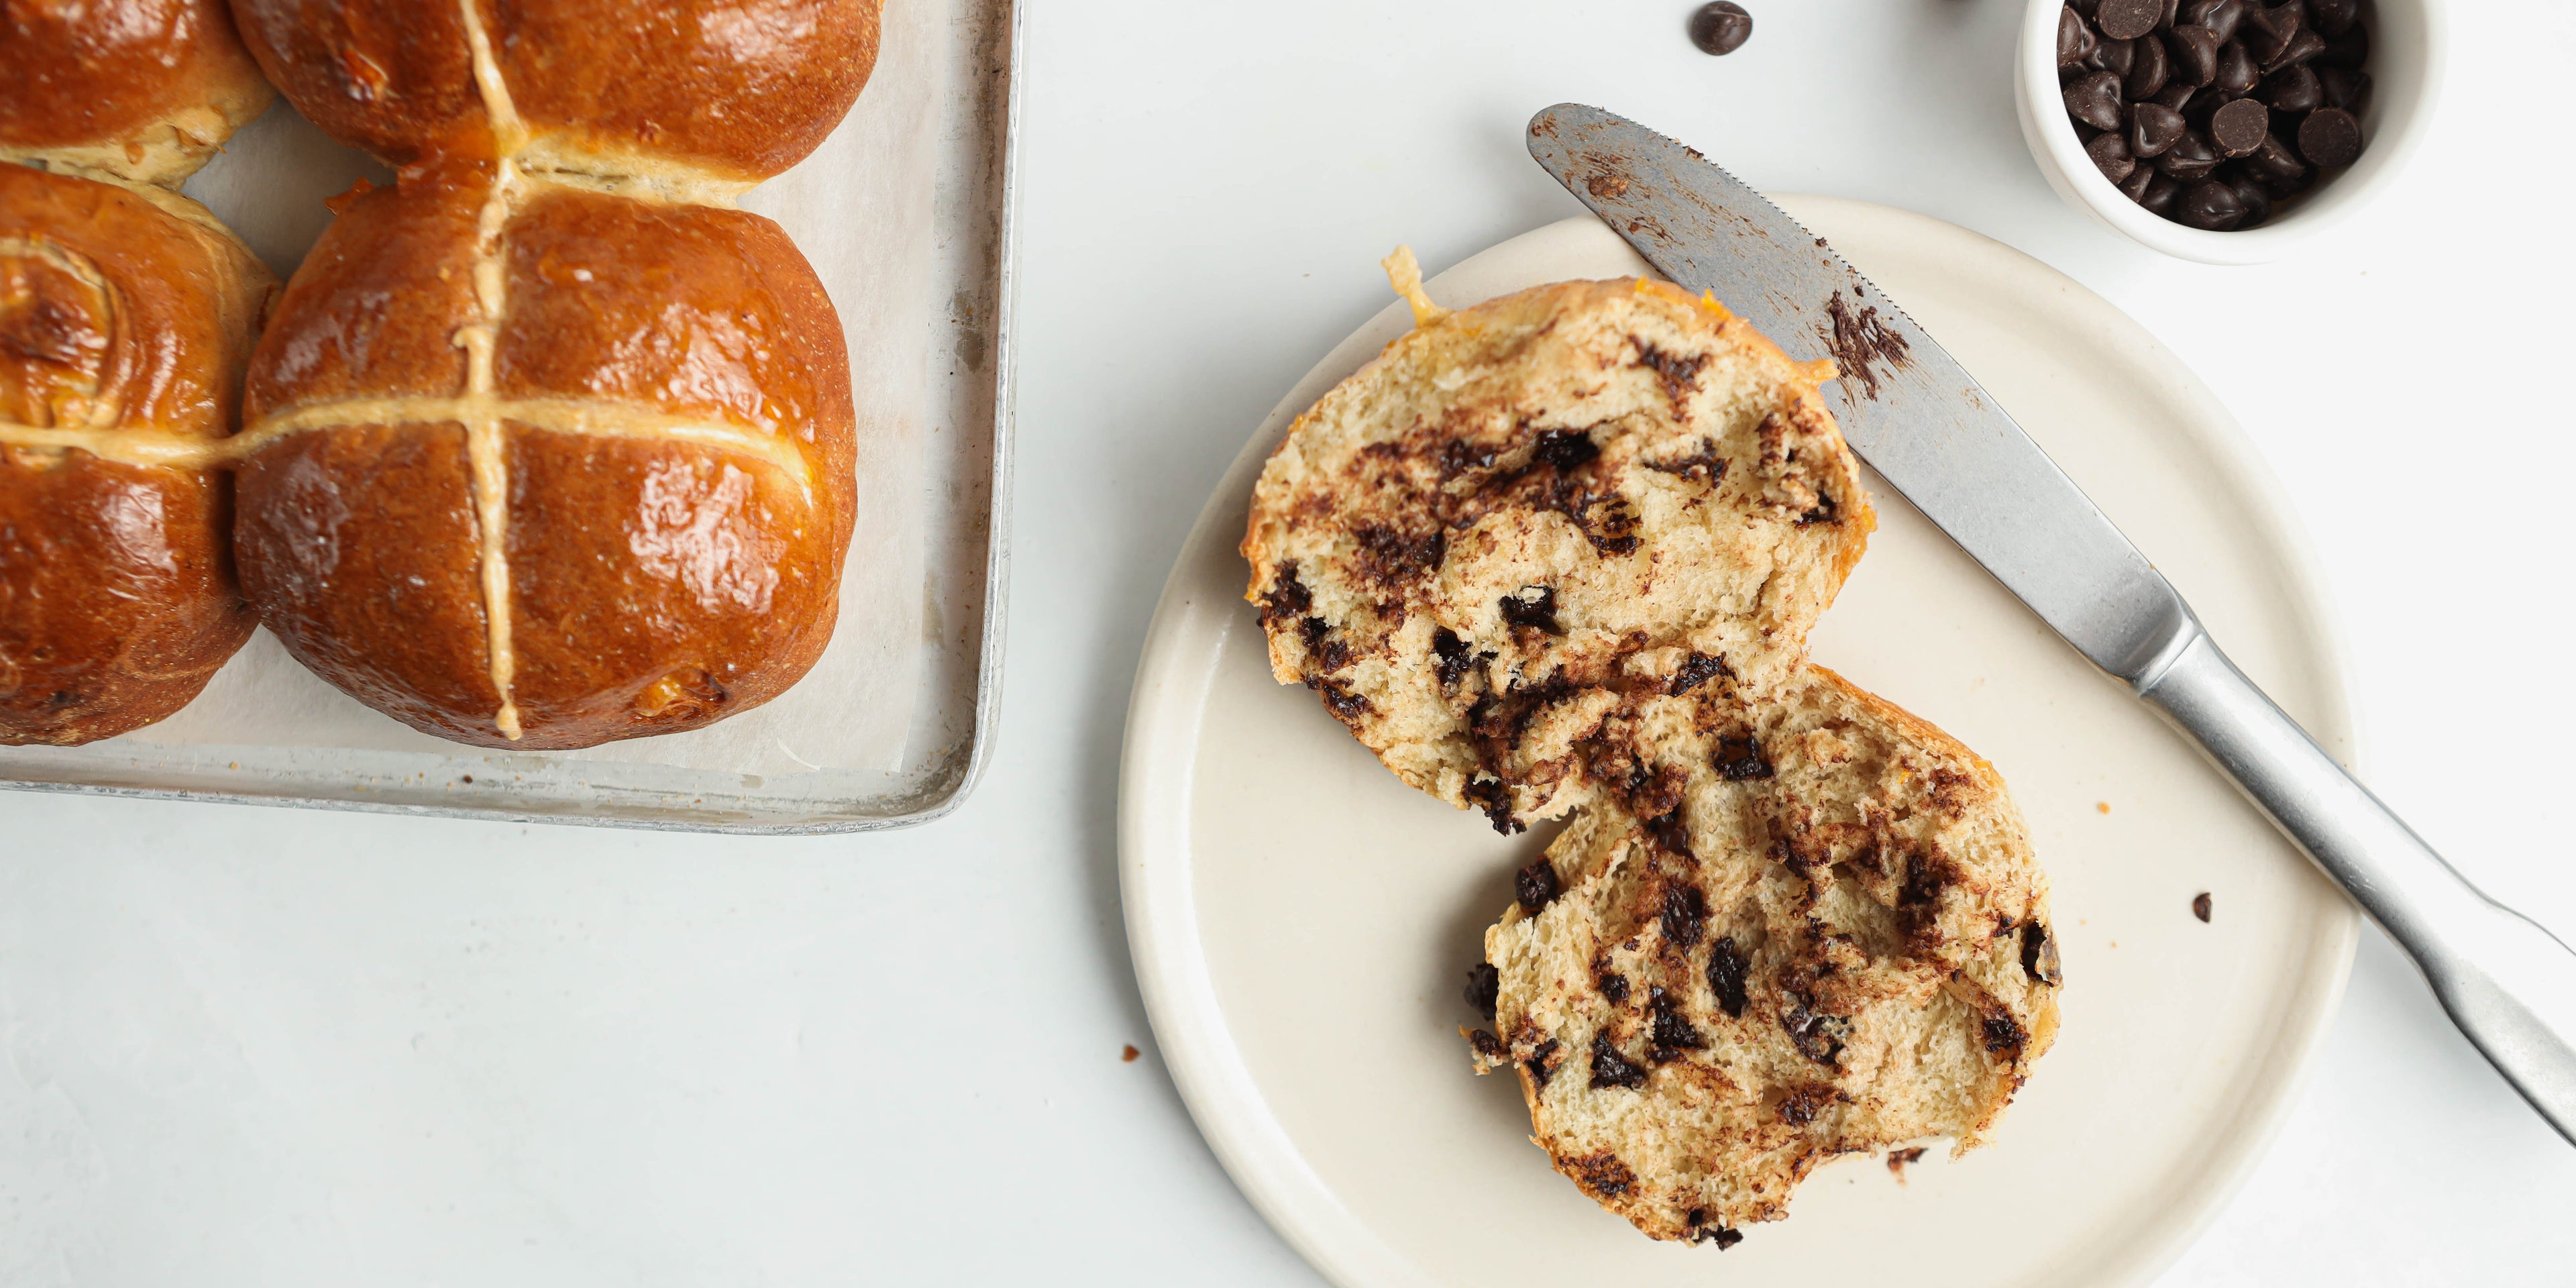 Vegan Hot Cross Buns filled with vegan dark chocolate chips, sliced in half ready to serve